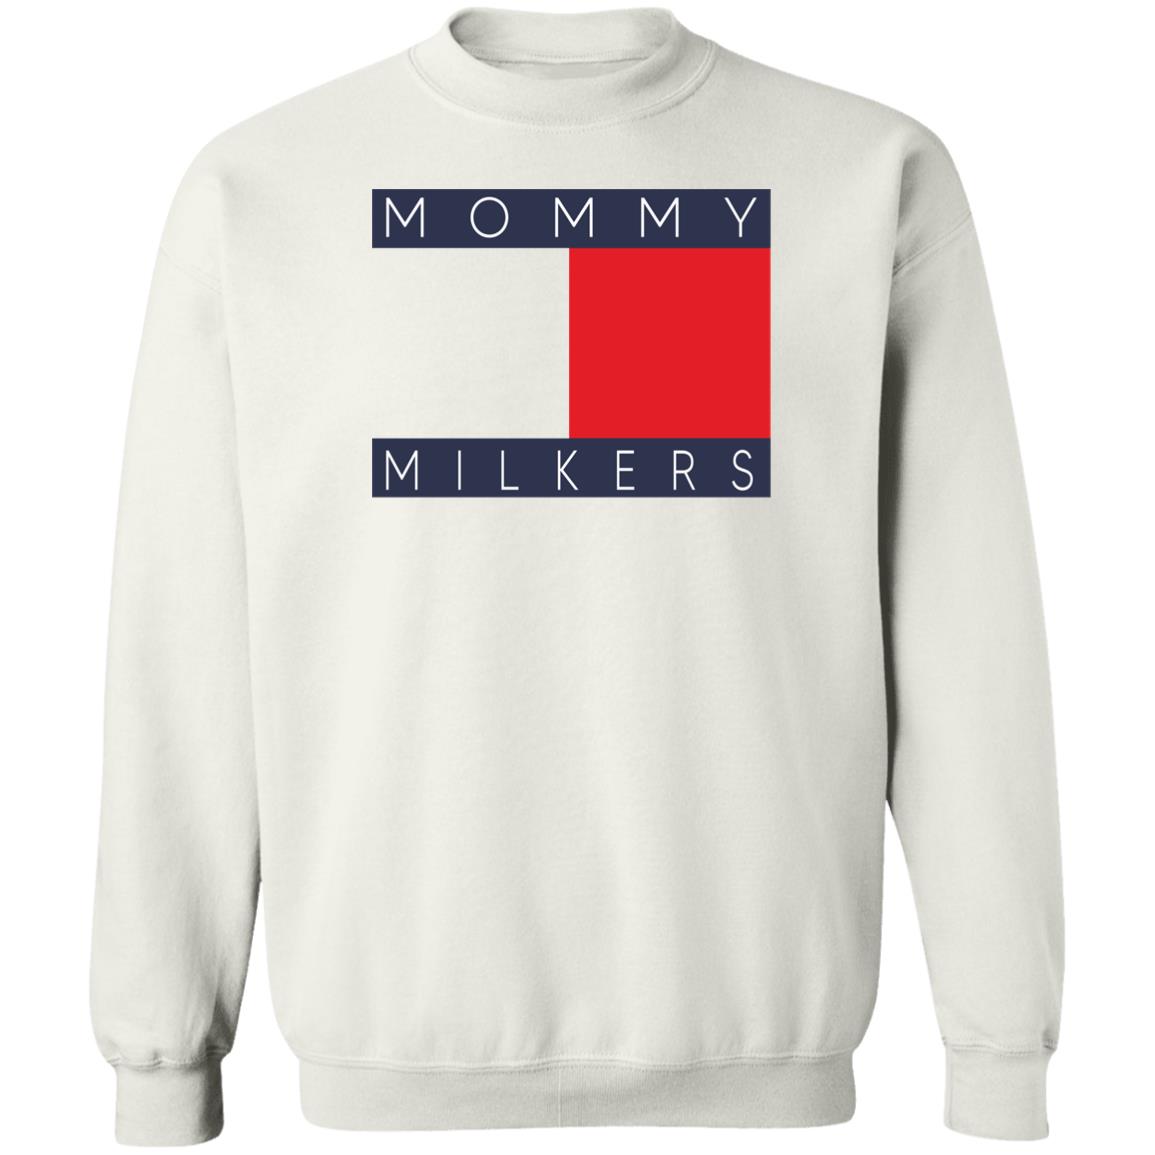 Mommy Milkers Shirt 2